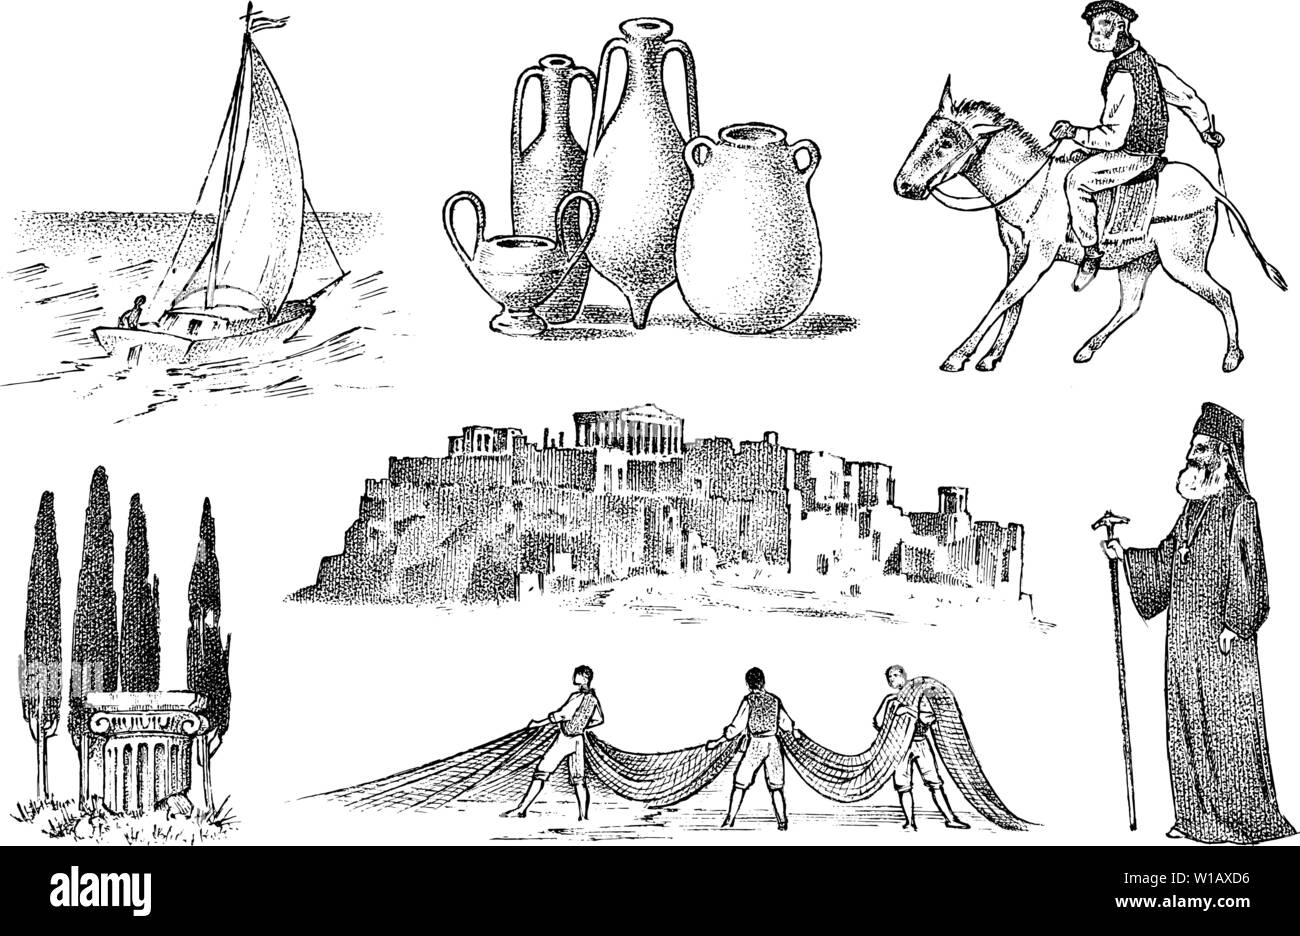 Greek culture. Set of national symbols. Sailboat and priest, jugs and fishing, trees, horse racing and ruins. Hand drawn engraved sketch in vintage Stock Vector